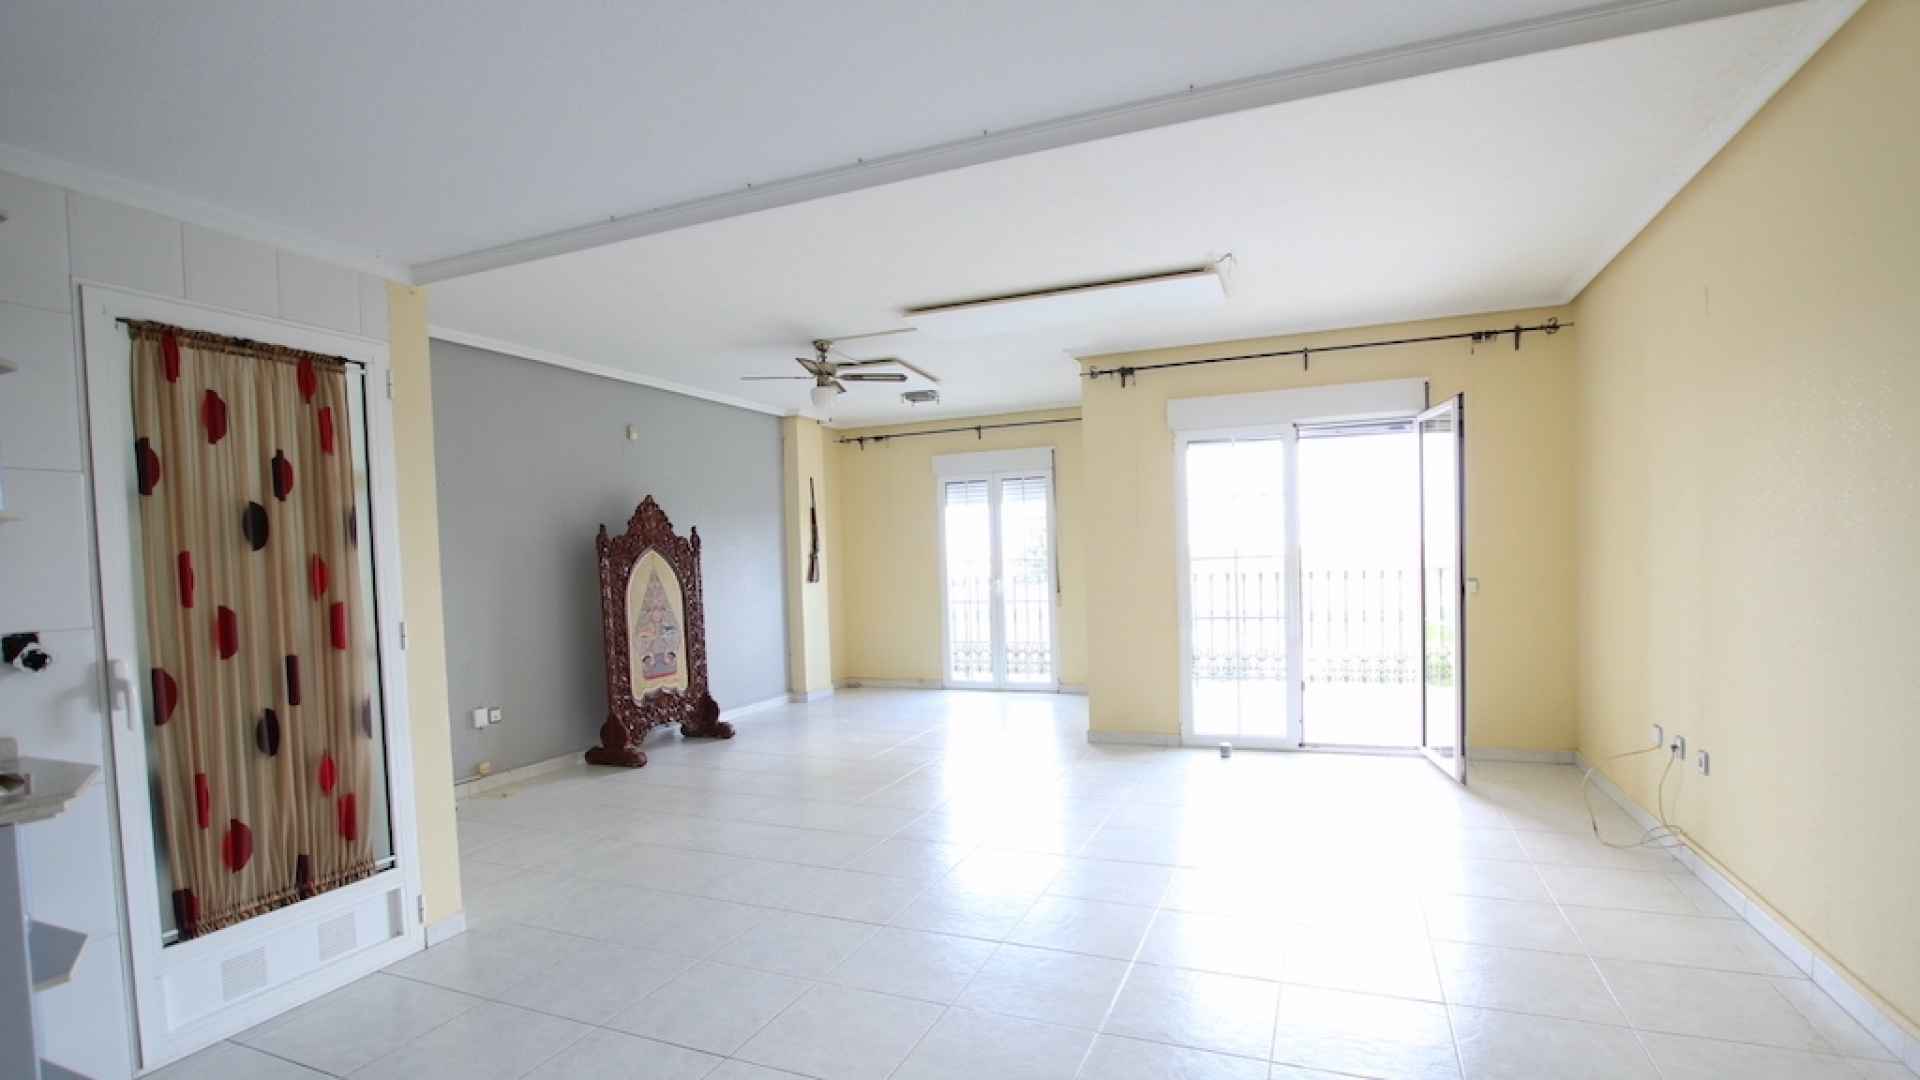 48172_exceptionally_spacious_3_bed_apartment_with_stunning_views_070823130835_img_7790